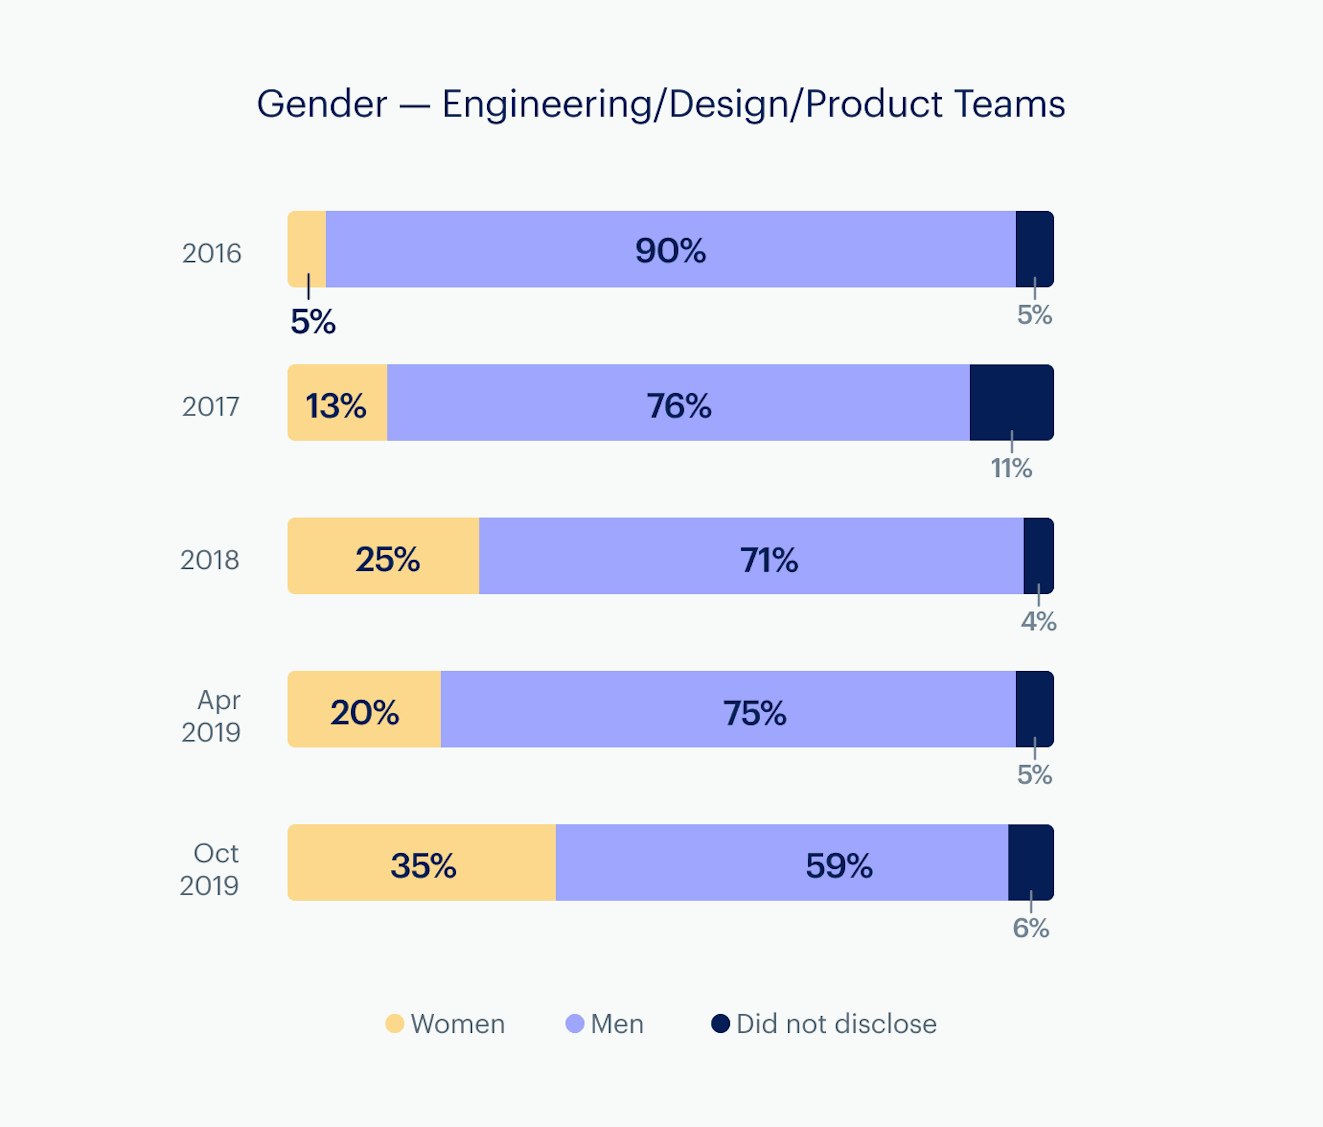 Infographic: Gender on Engineering, Design, & Product